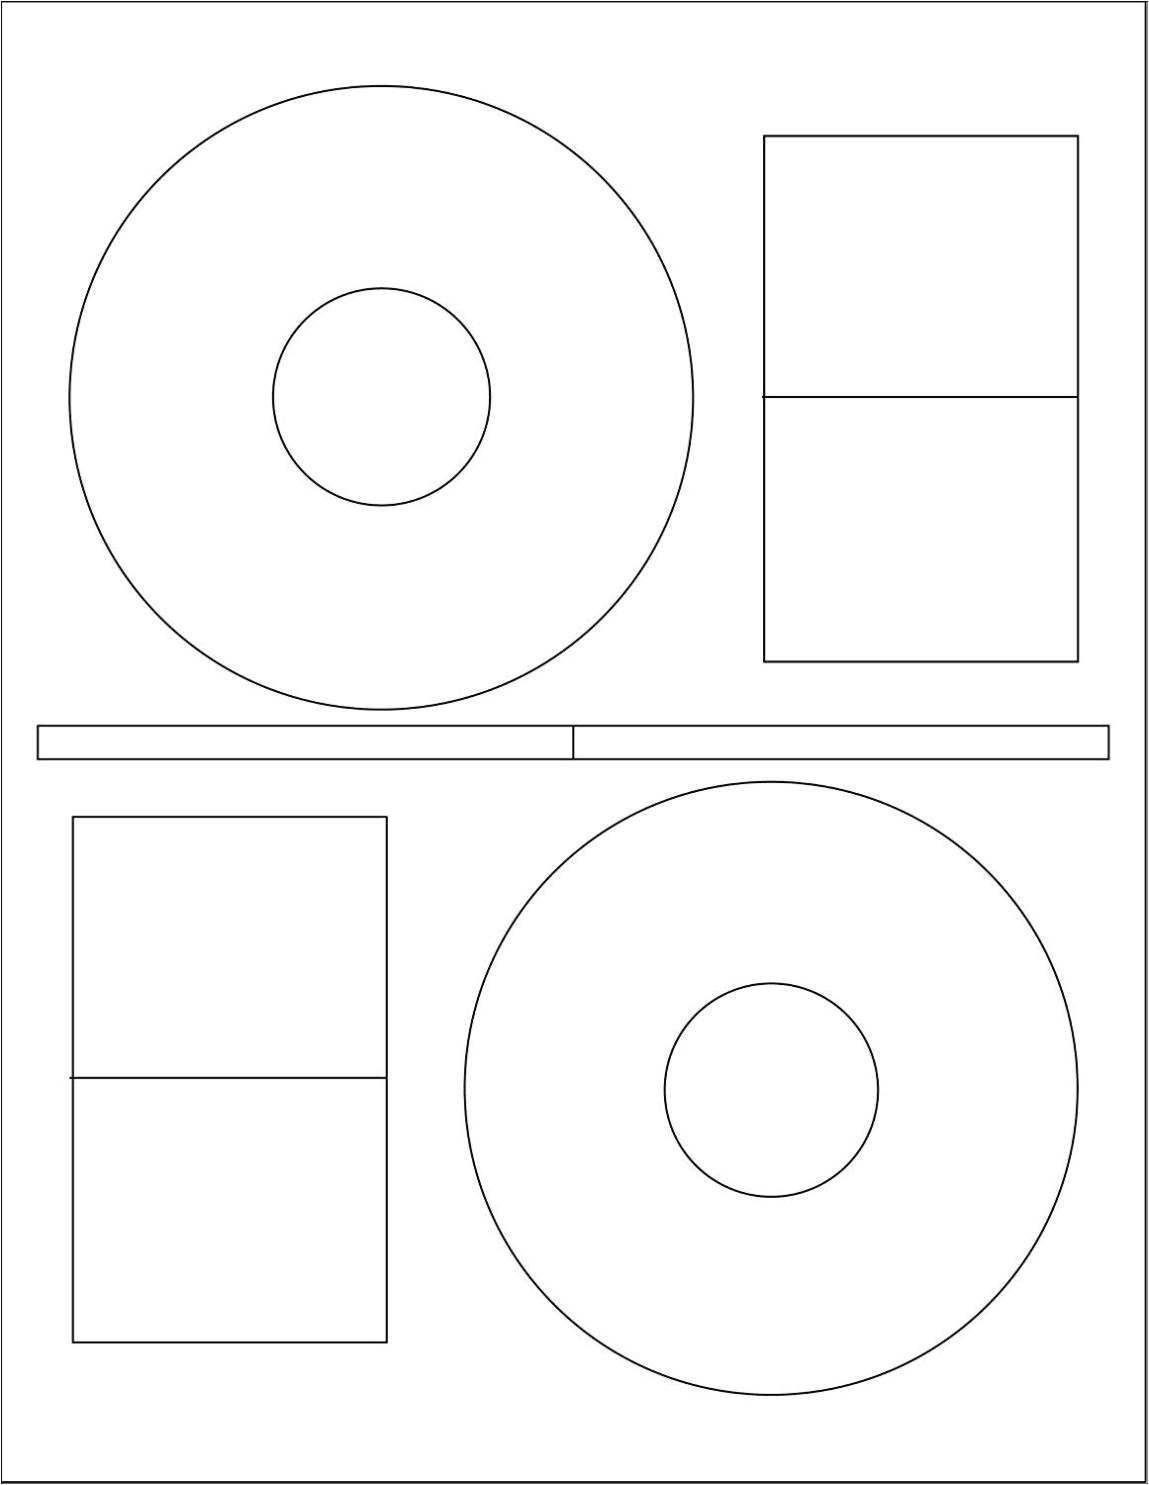 Cd Stomper 2 Up Standard With Center Labels Template | Williamson Ga Throughout Cd Stomper 2 Up Standard With Center Labels Template